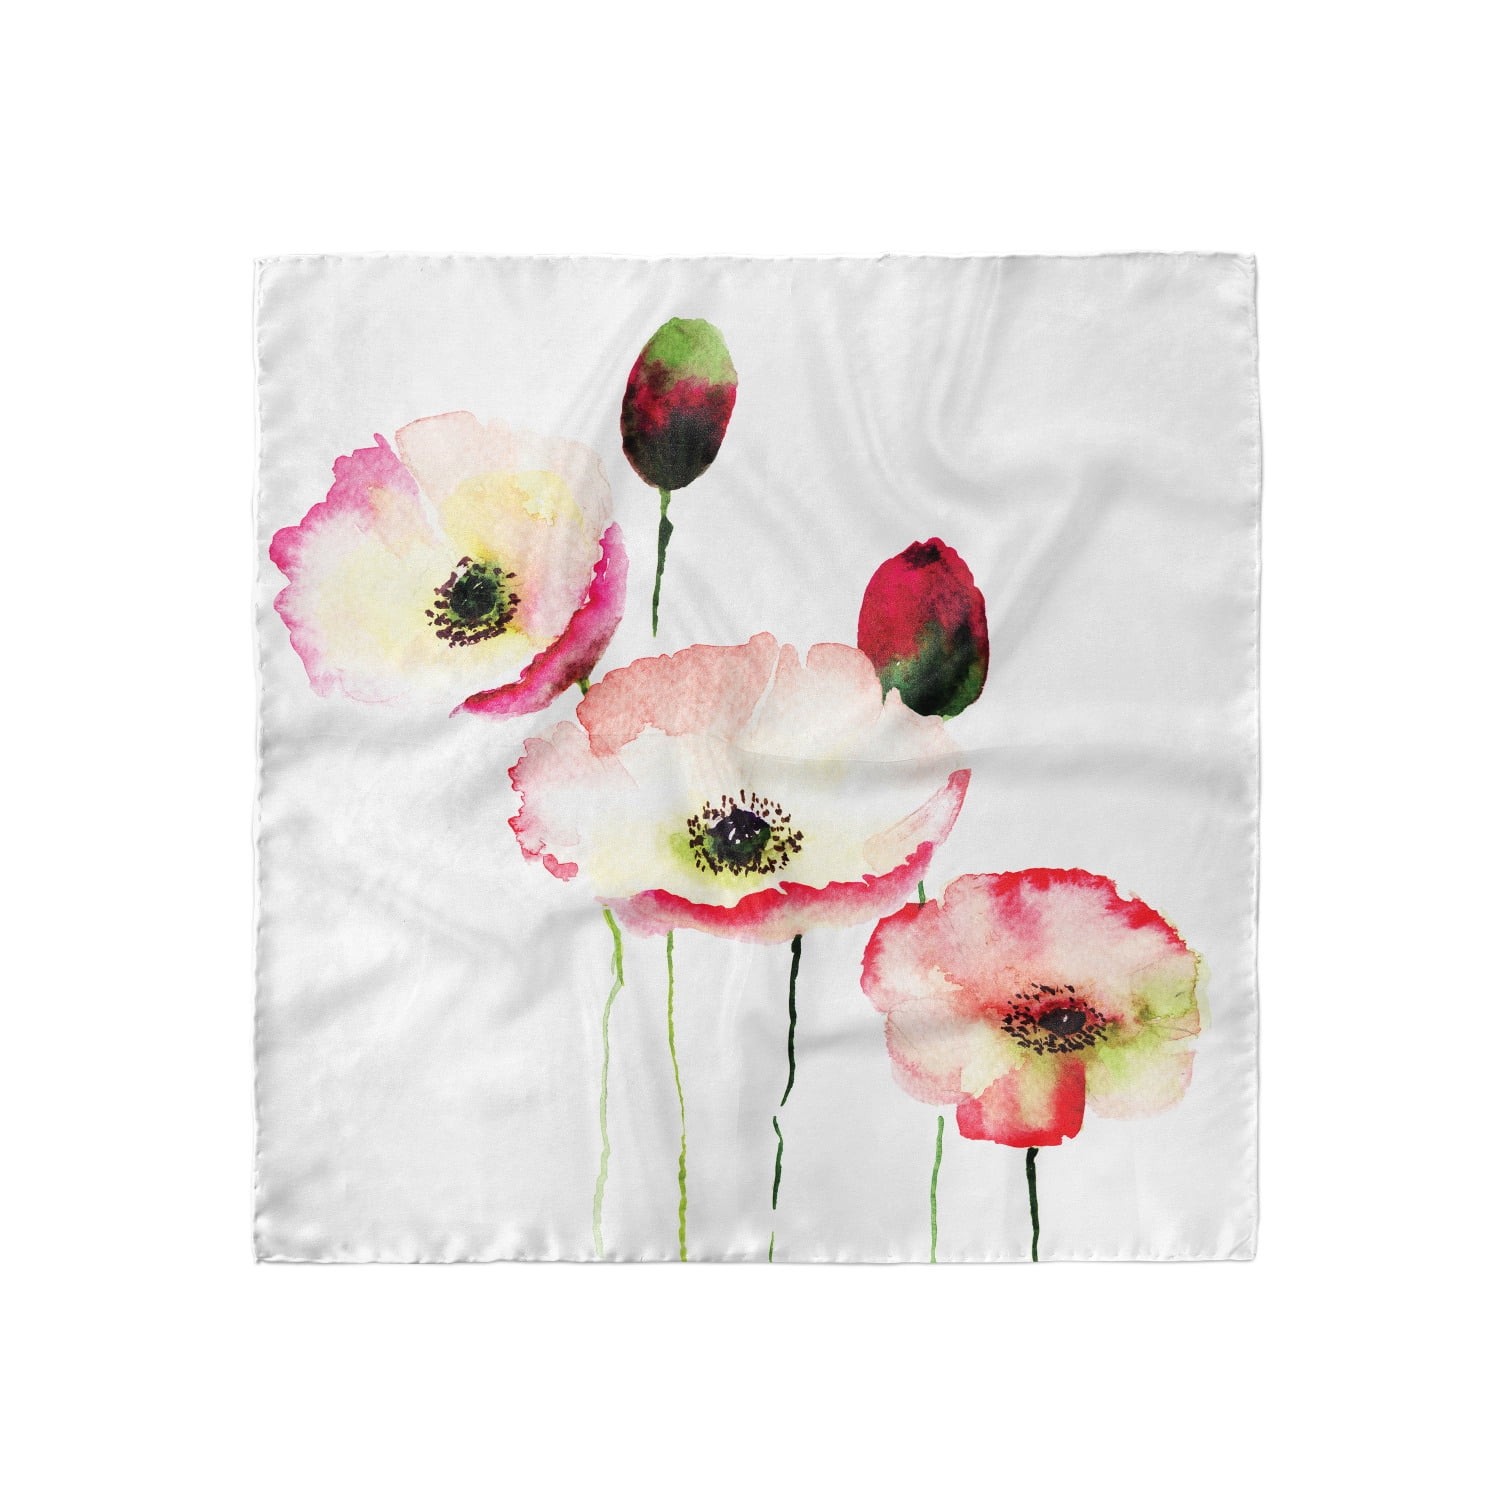 kimono inspired Long silk scarf Poppies summer wrap- thank you gift for nurse hand painted scarves pink & red poppies flowers